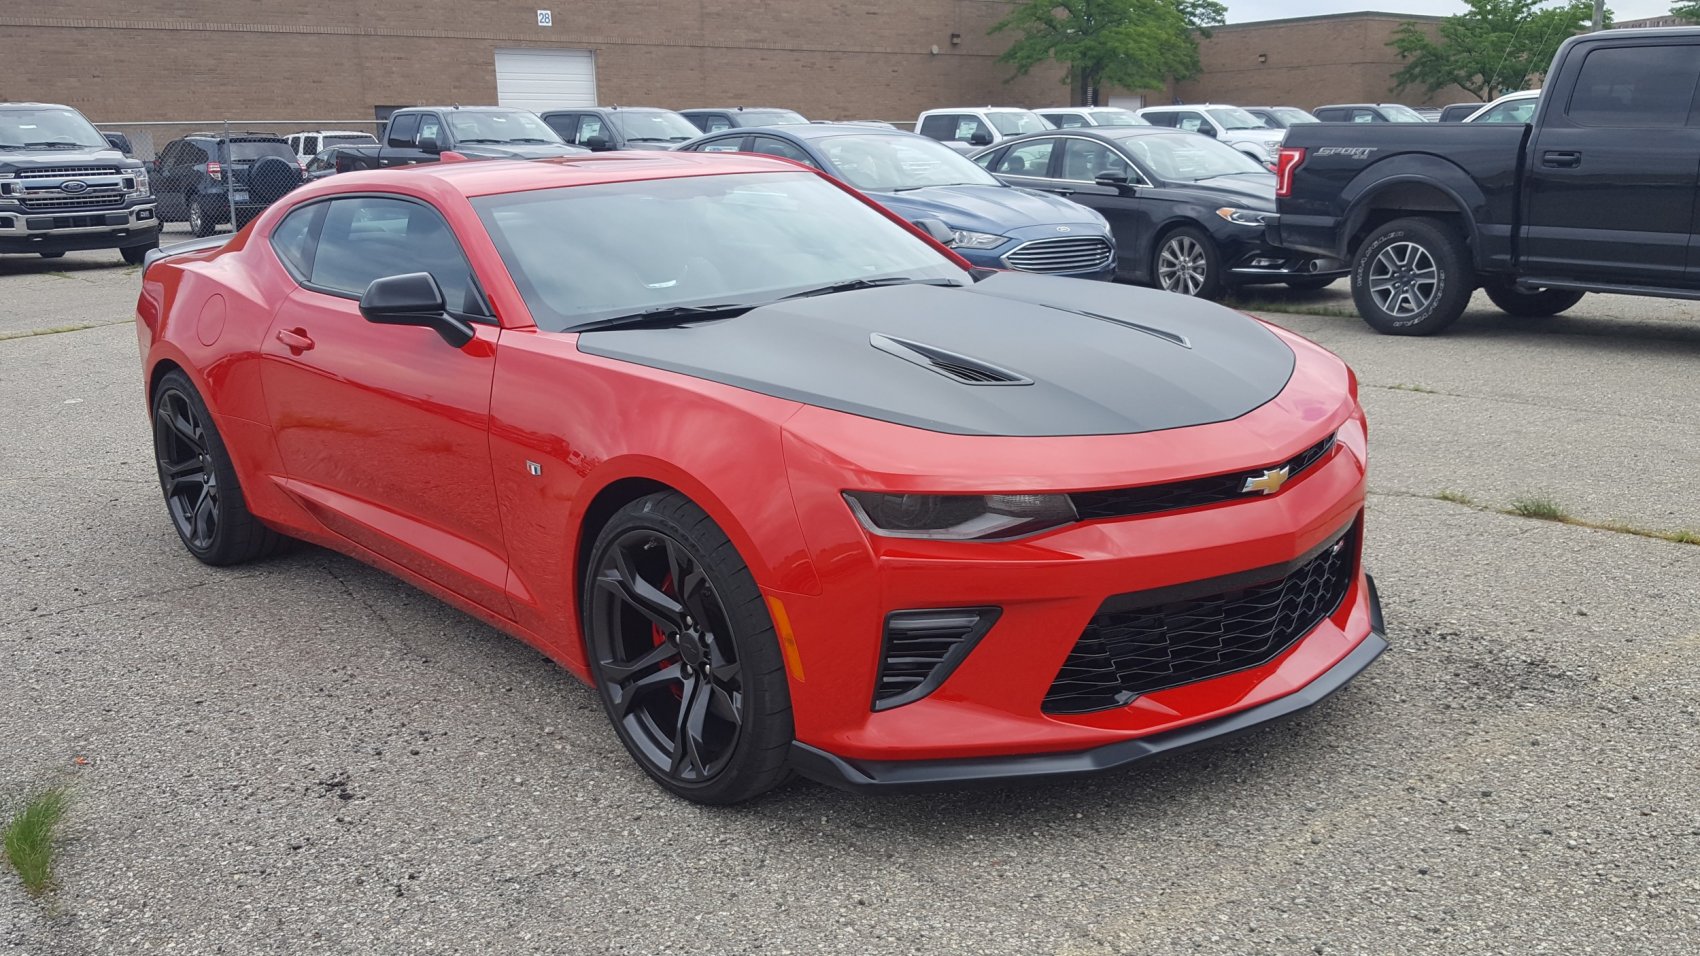 Road Test Review 2018 Chevrolet Camaro SS 1LE 6MT By